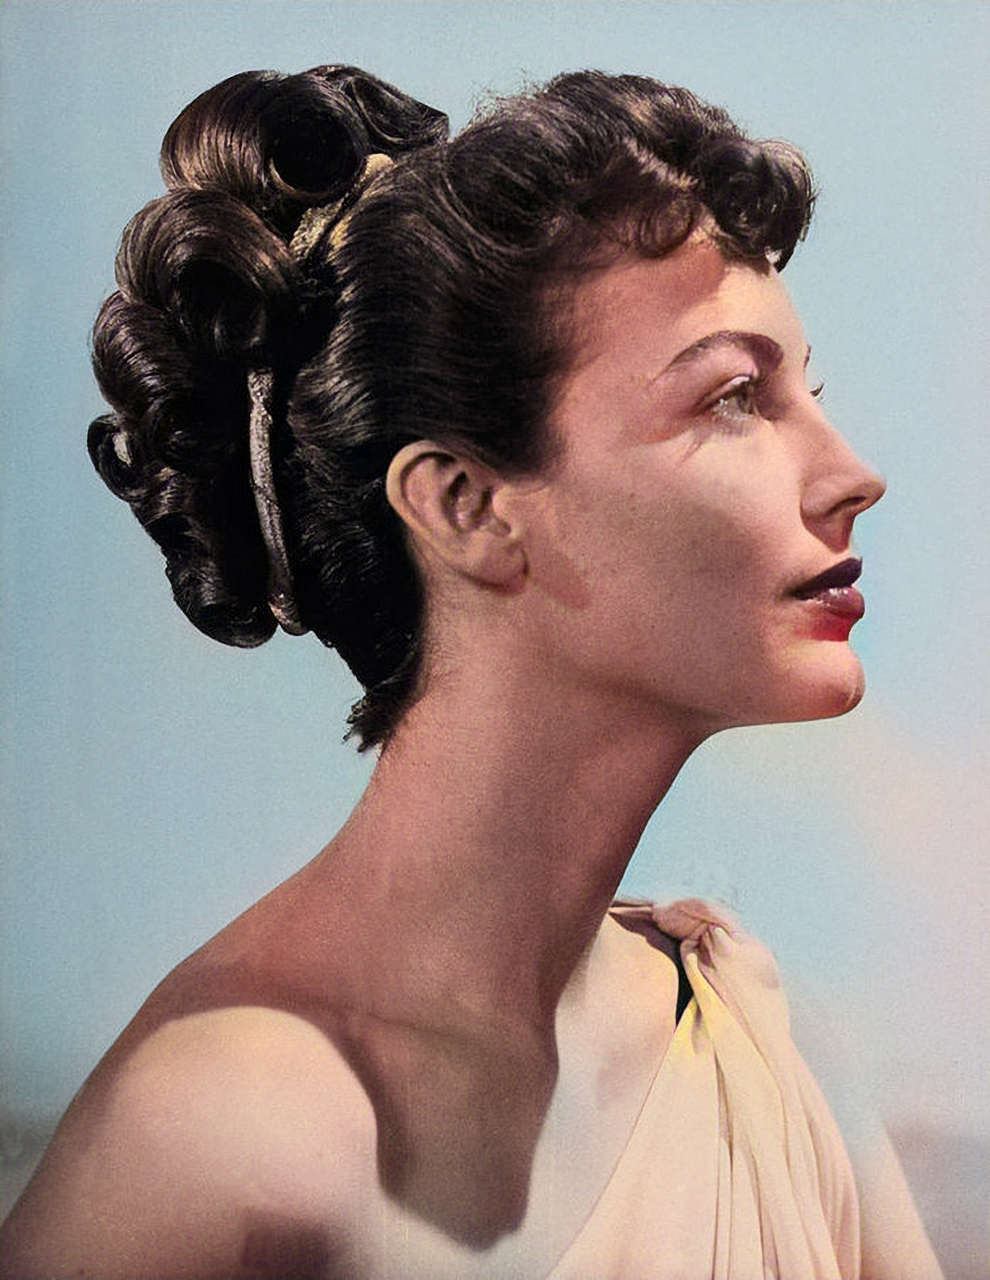 Rip Ava Gardner A Touch Of Venus Upscaled And Colored NSF